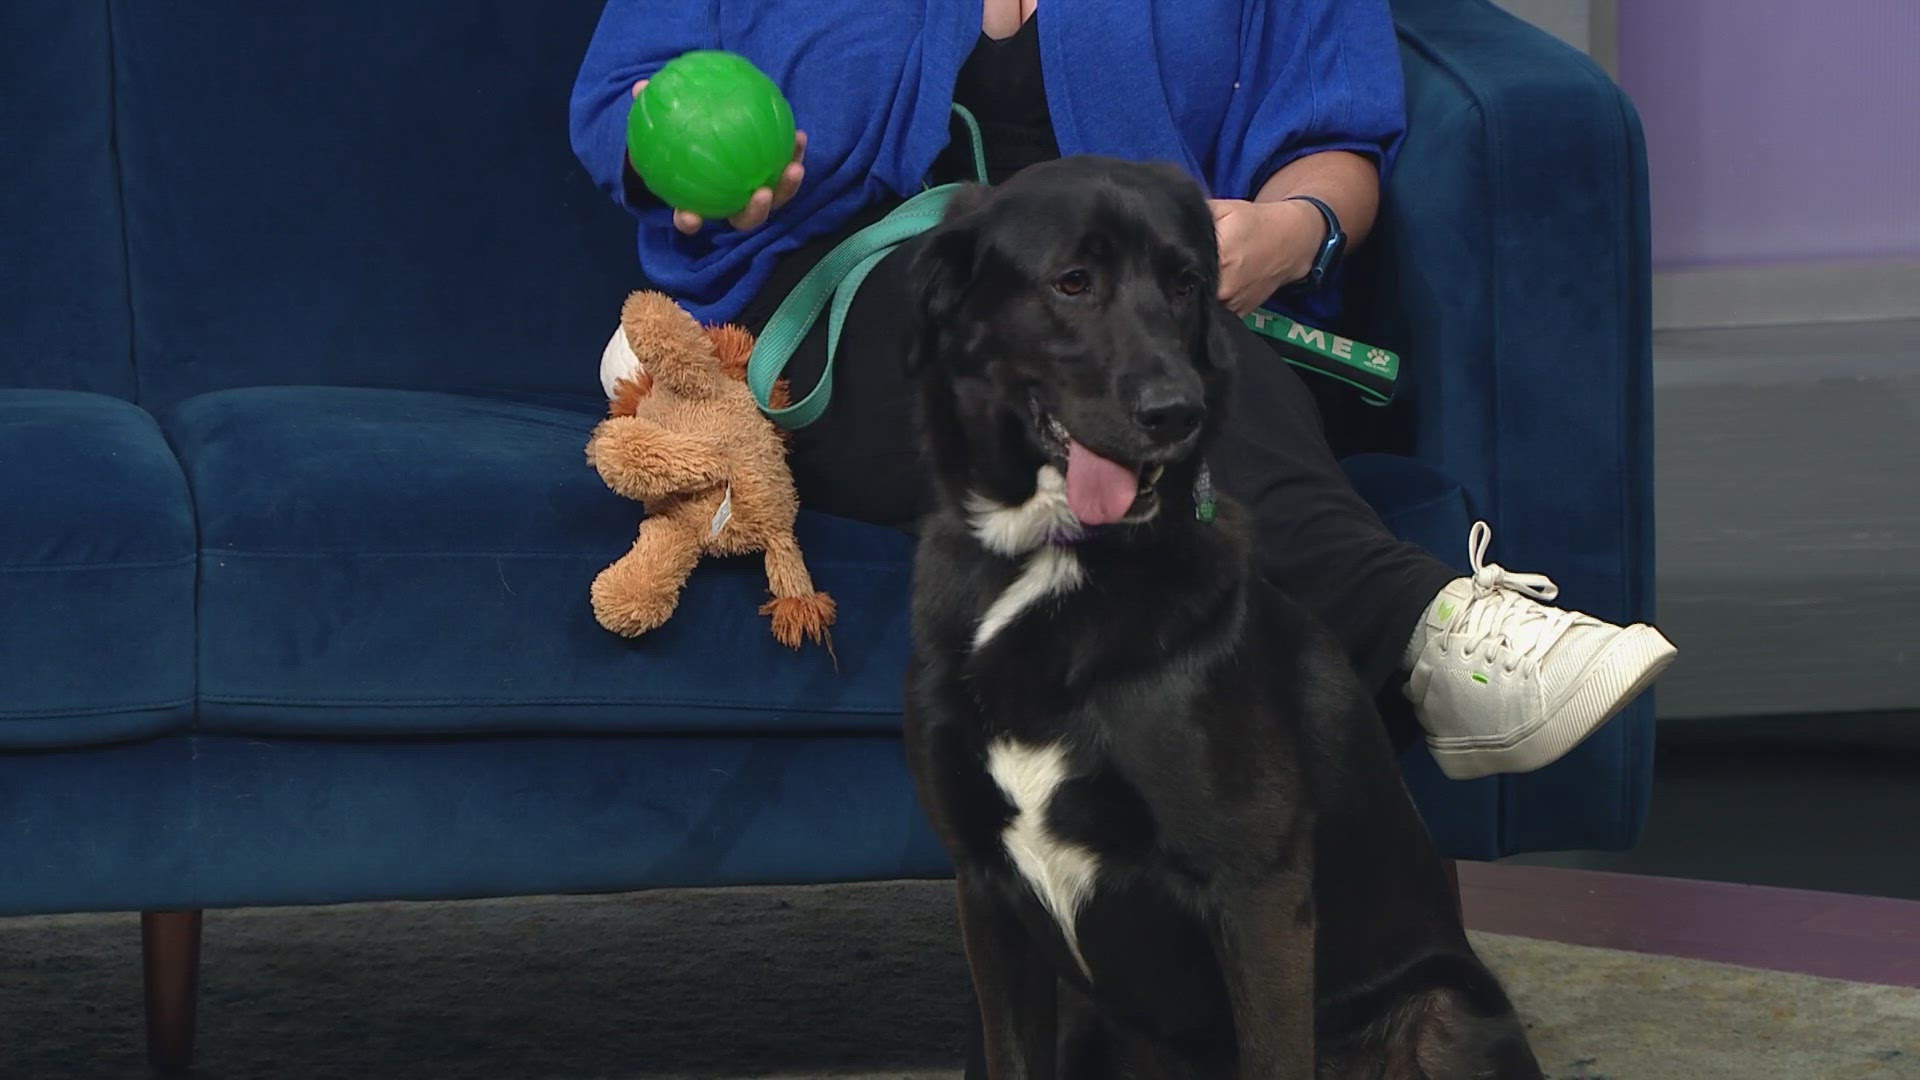 To learn more about Kida and other dogs, visit the Rocky Mountain Lab Rescue!